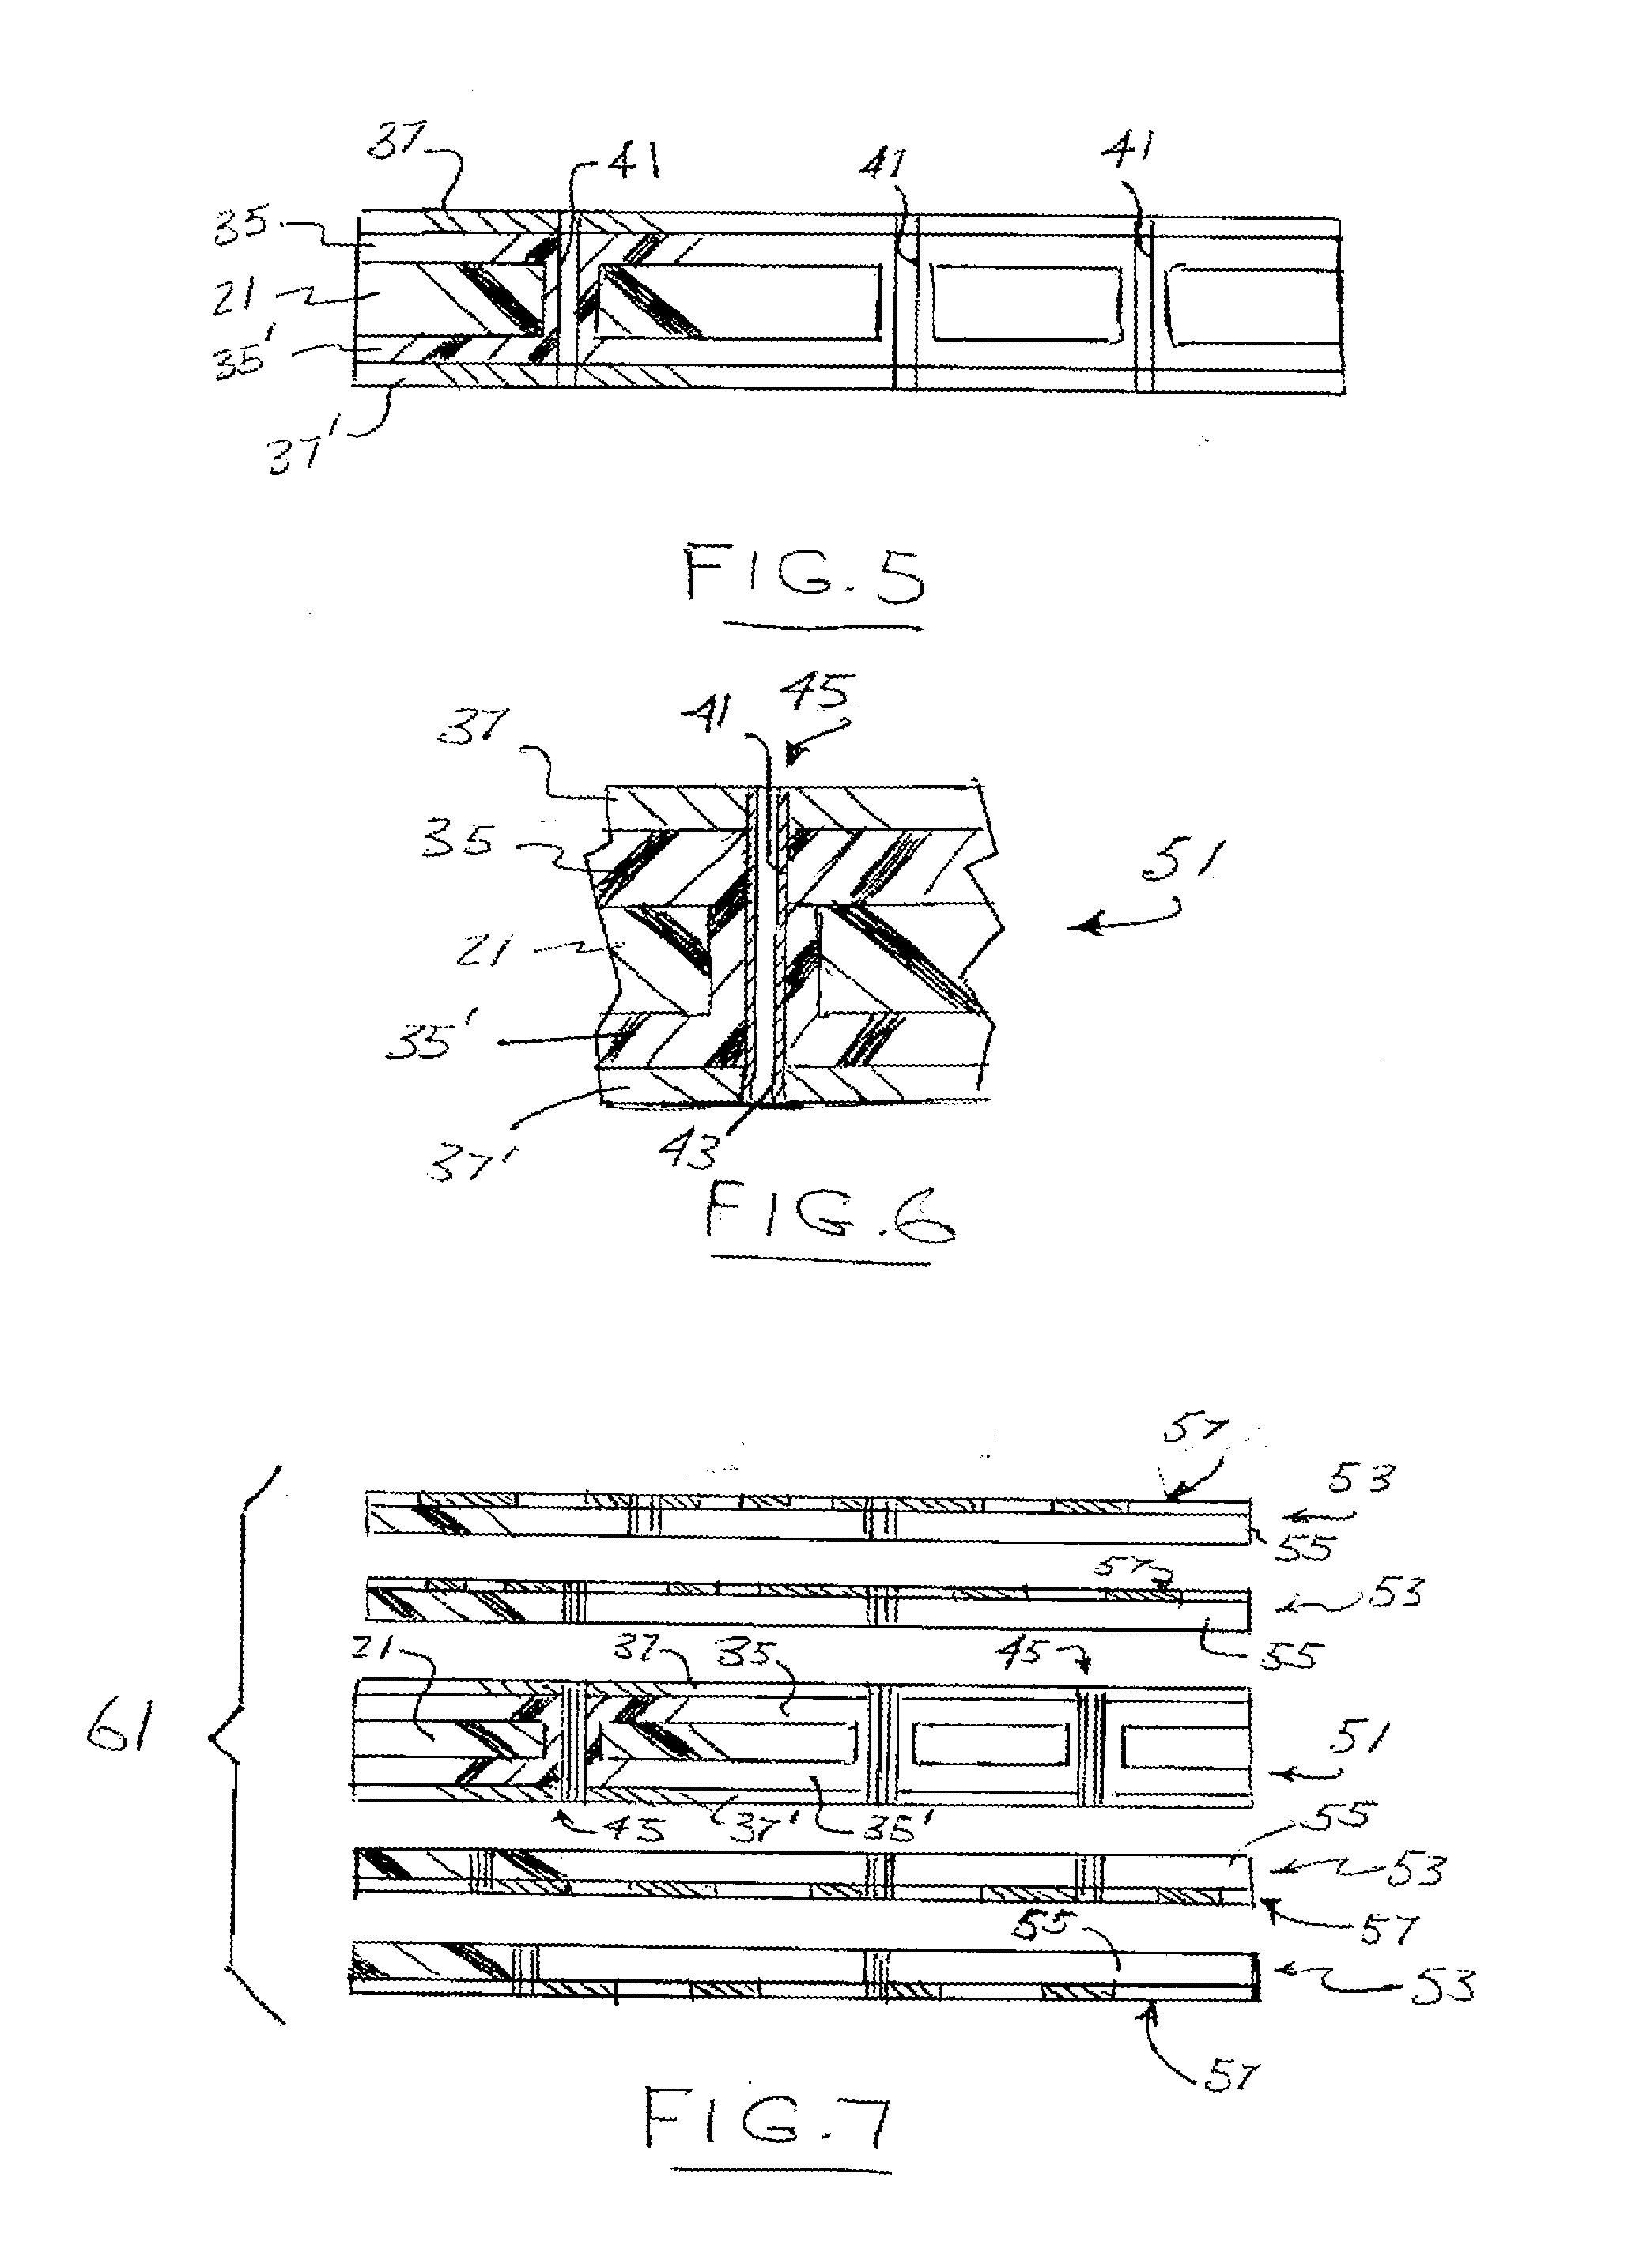 Power core for use in circuitized substrate and method of making same